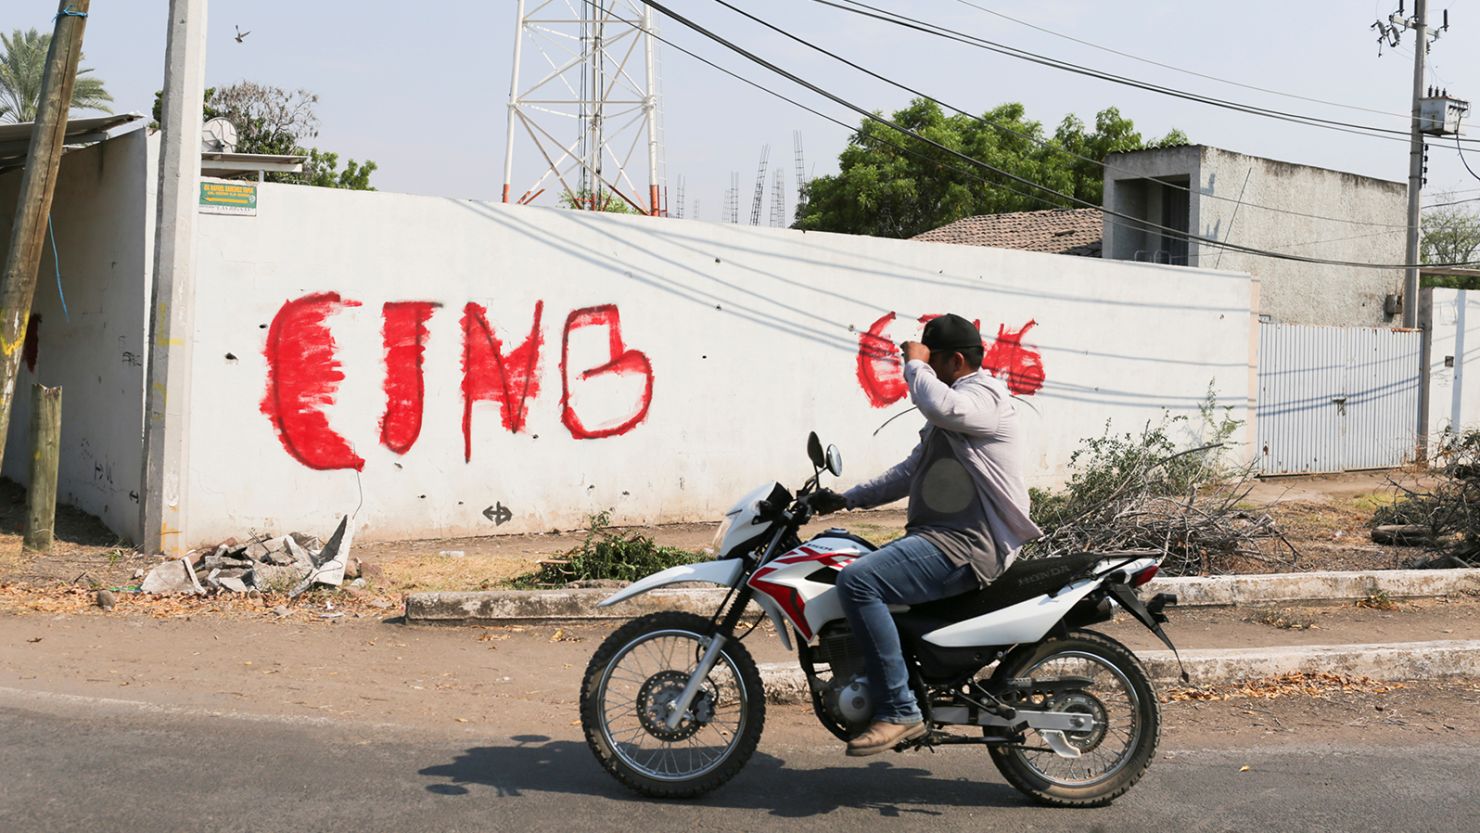 A motorist passes by a wall with a graffiti of the Jalisco New Generation Cartel (CJNG) in Michoacan state, Mexico, on April 23.